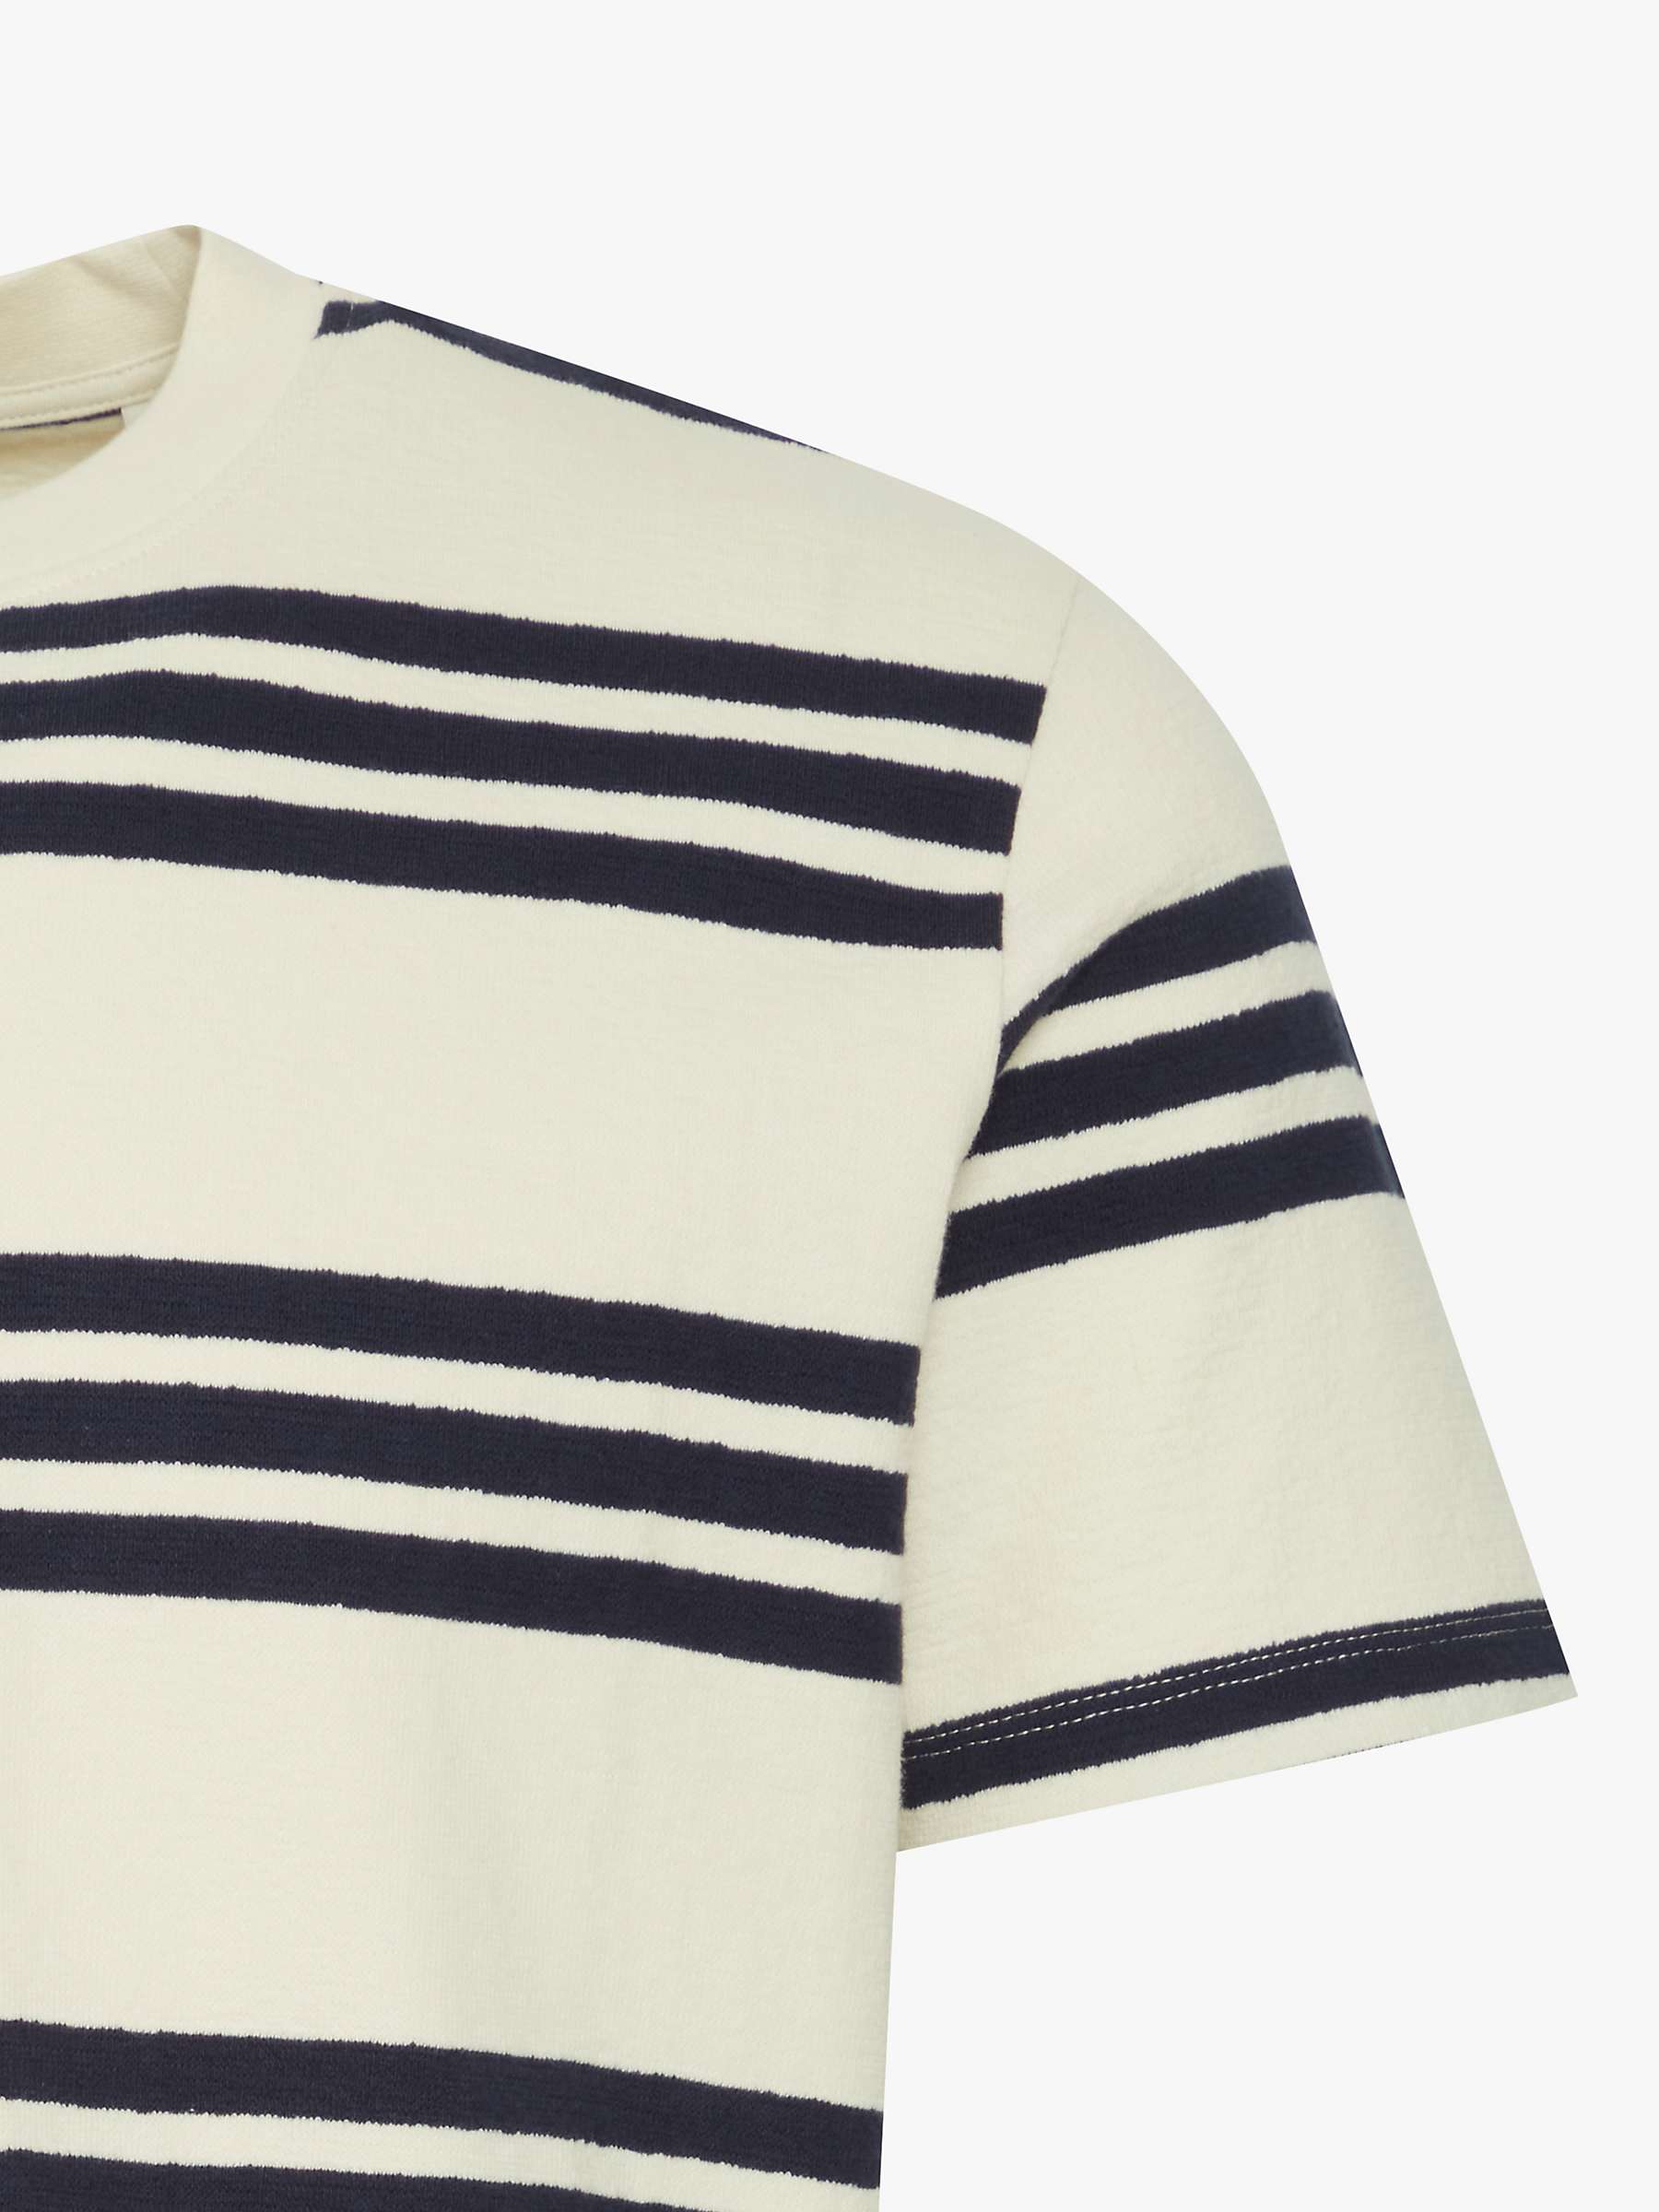 Buy Casual Friday Thor Short Sleeve Striped T-, White/Multi Online at johnlewis.com